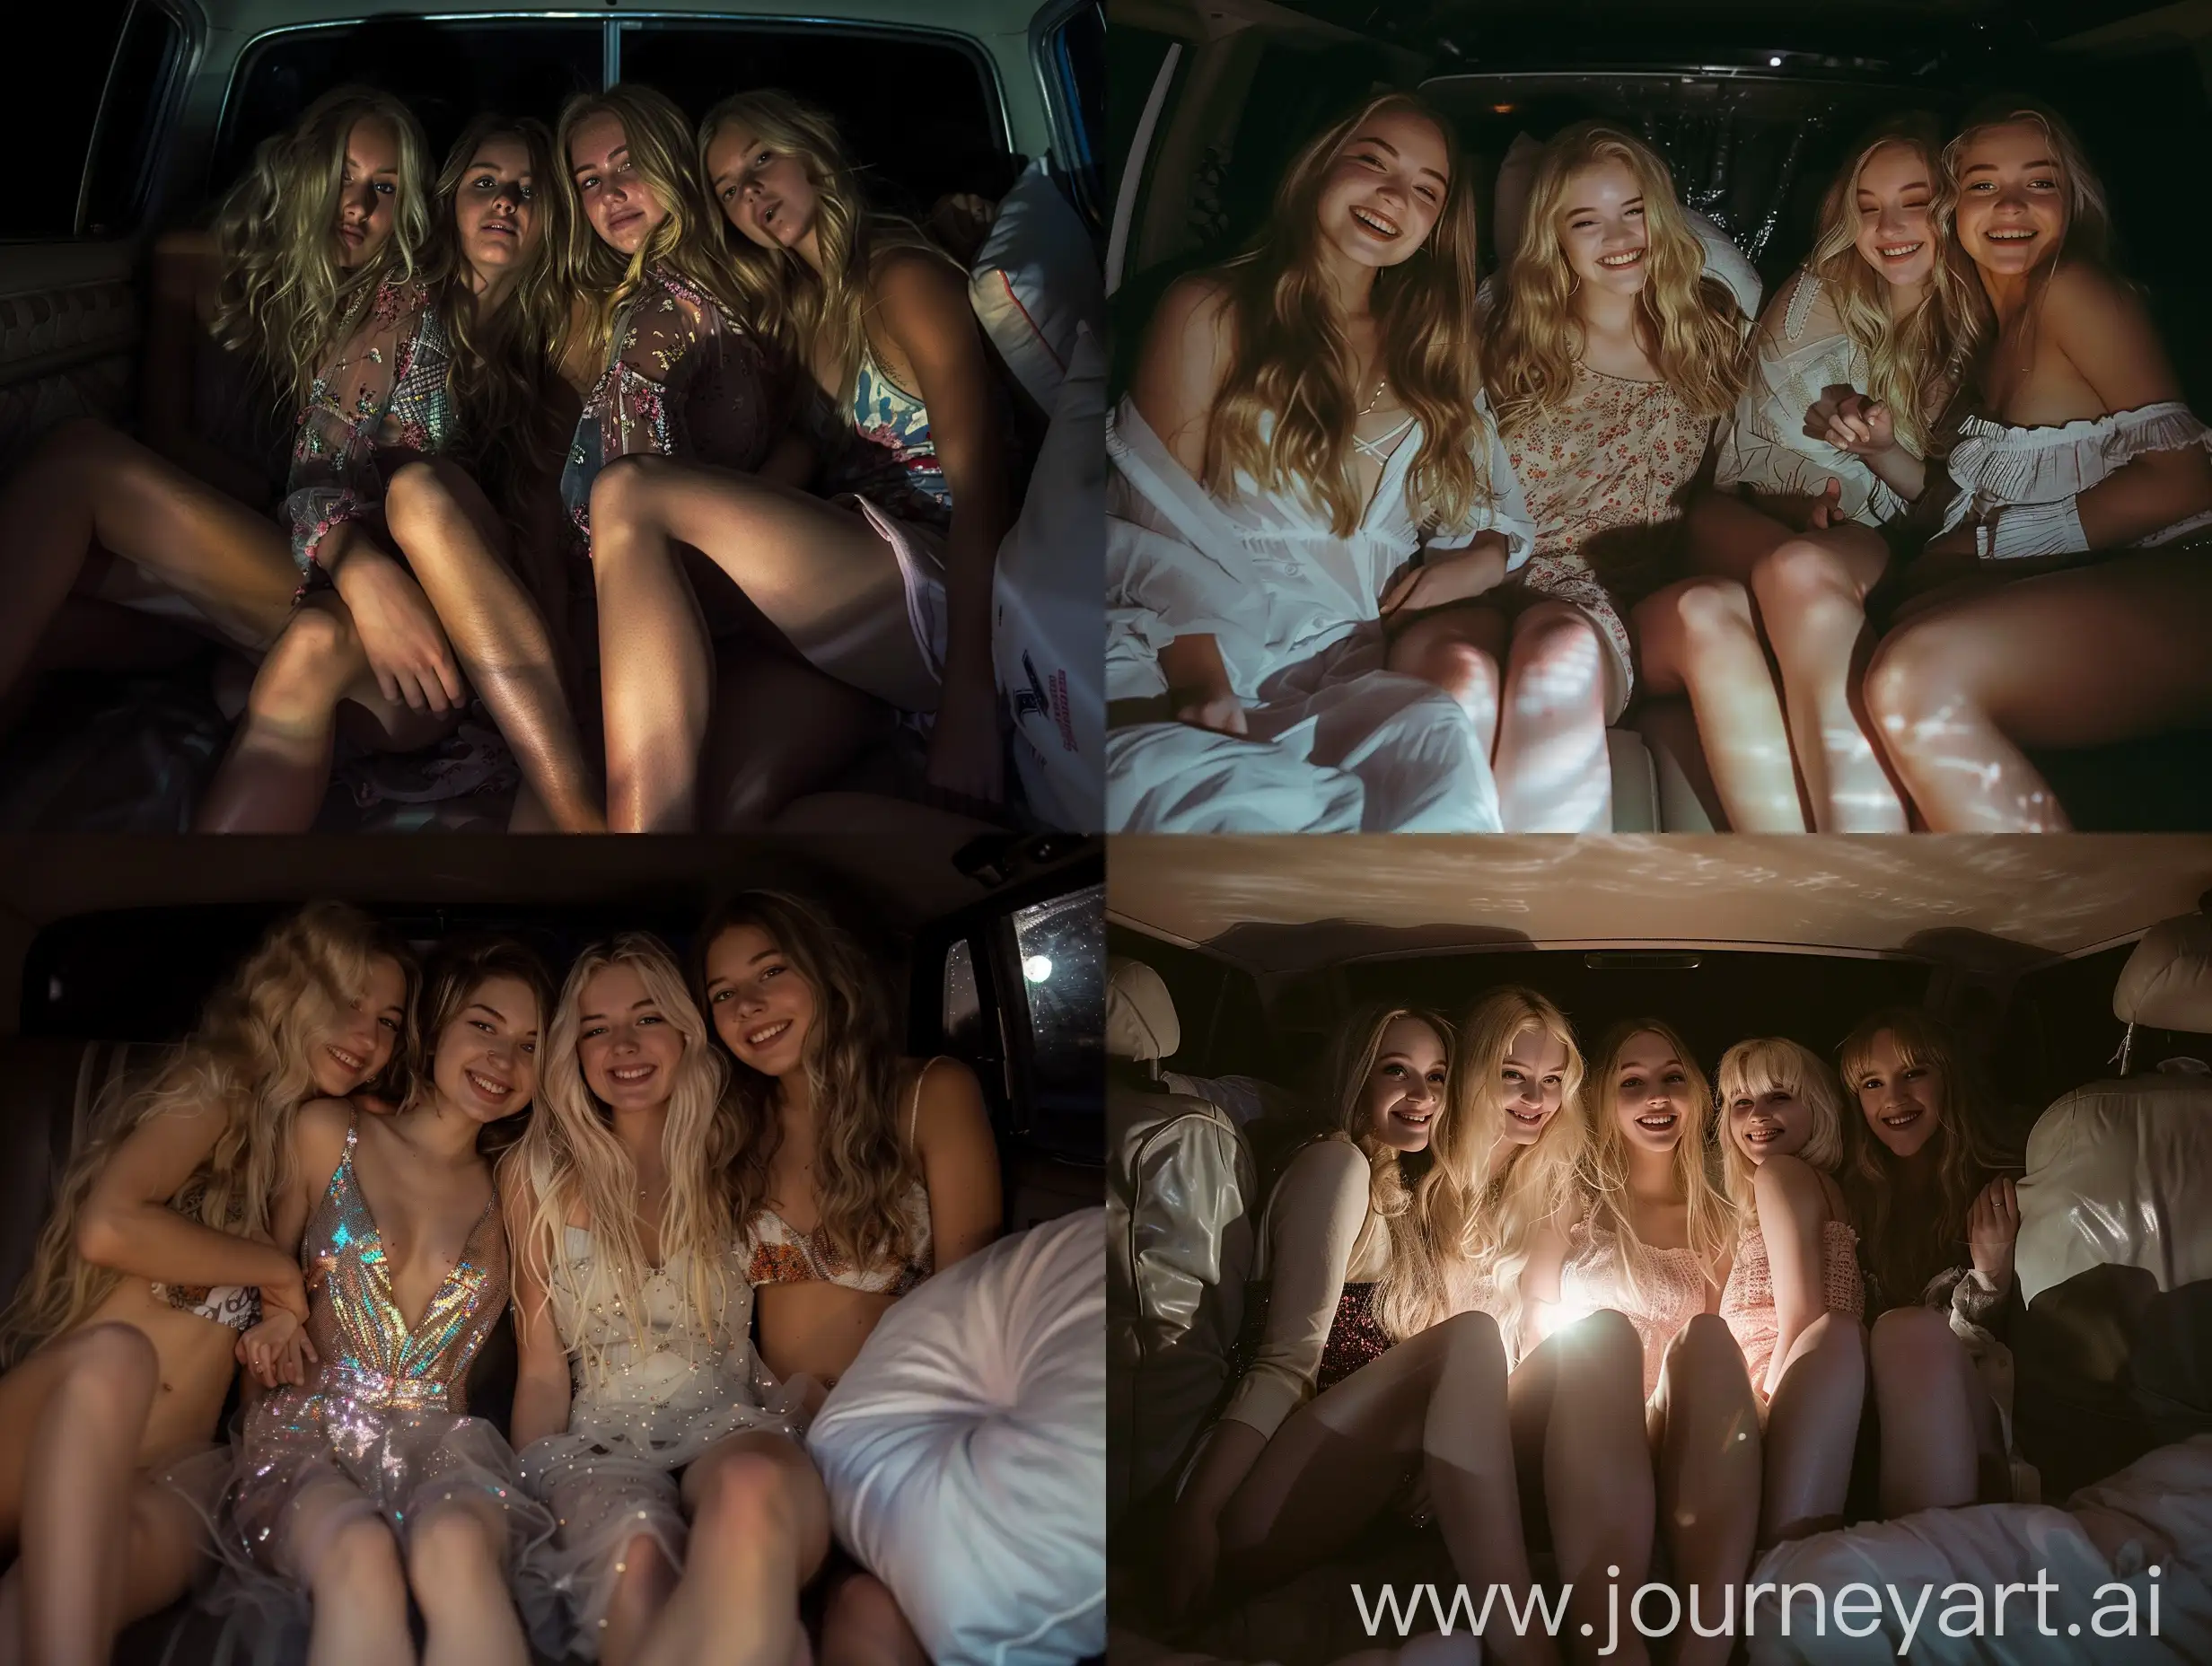 4 girls, long blond hair , 22 years old, inside a room, escuro, flash light, transparent dress, , influencer, beauty ,,sleepover, at night, flash, smiling,  makeup,, sitting on car , fat legs, playing with pillow
 no effect, , no filters , iphone photo natural